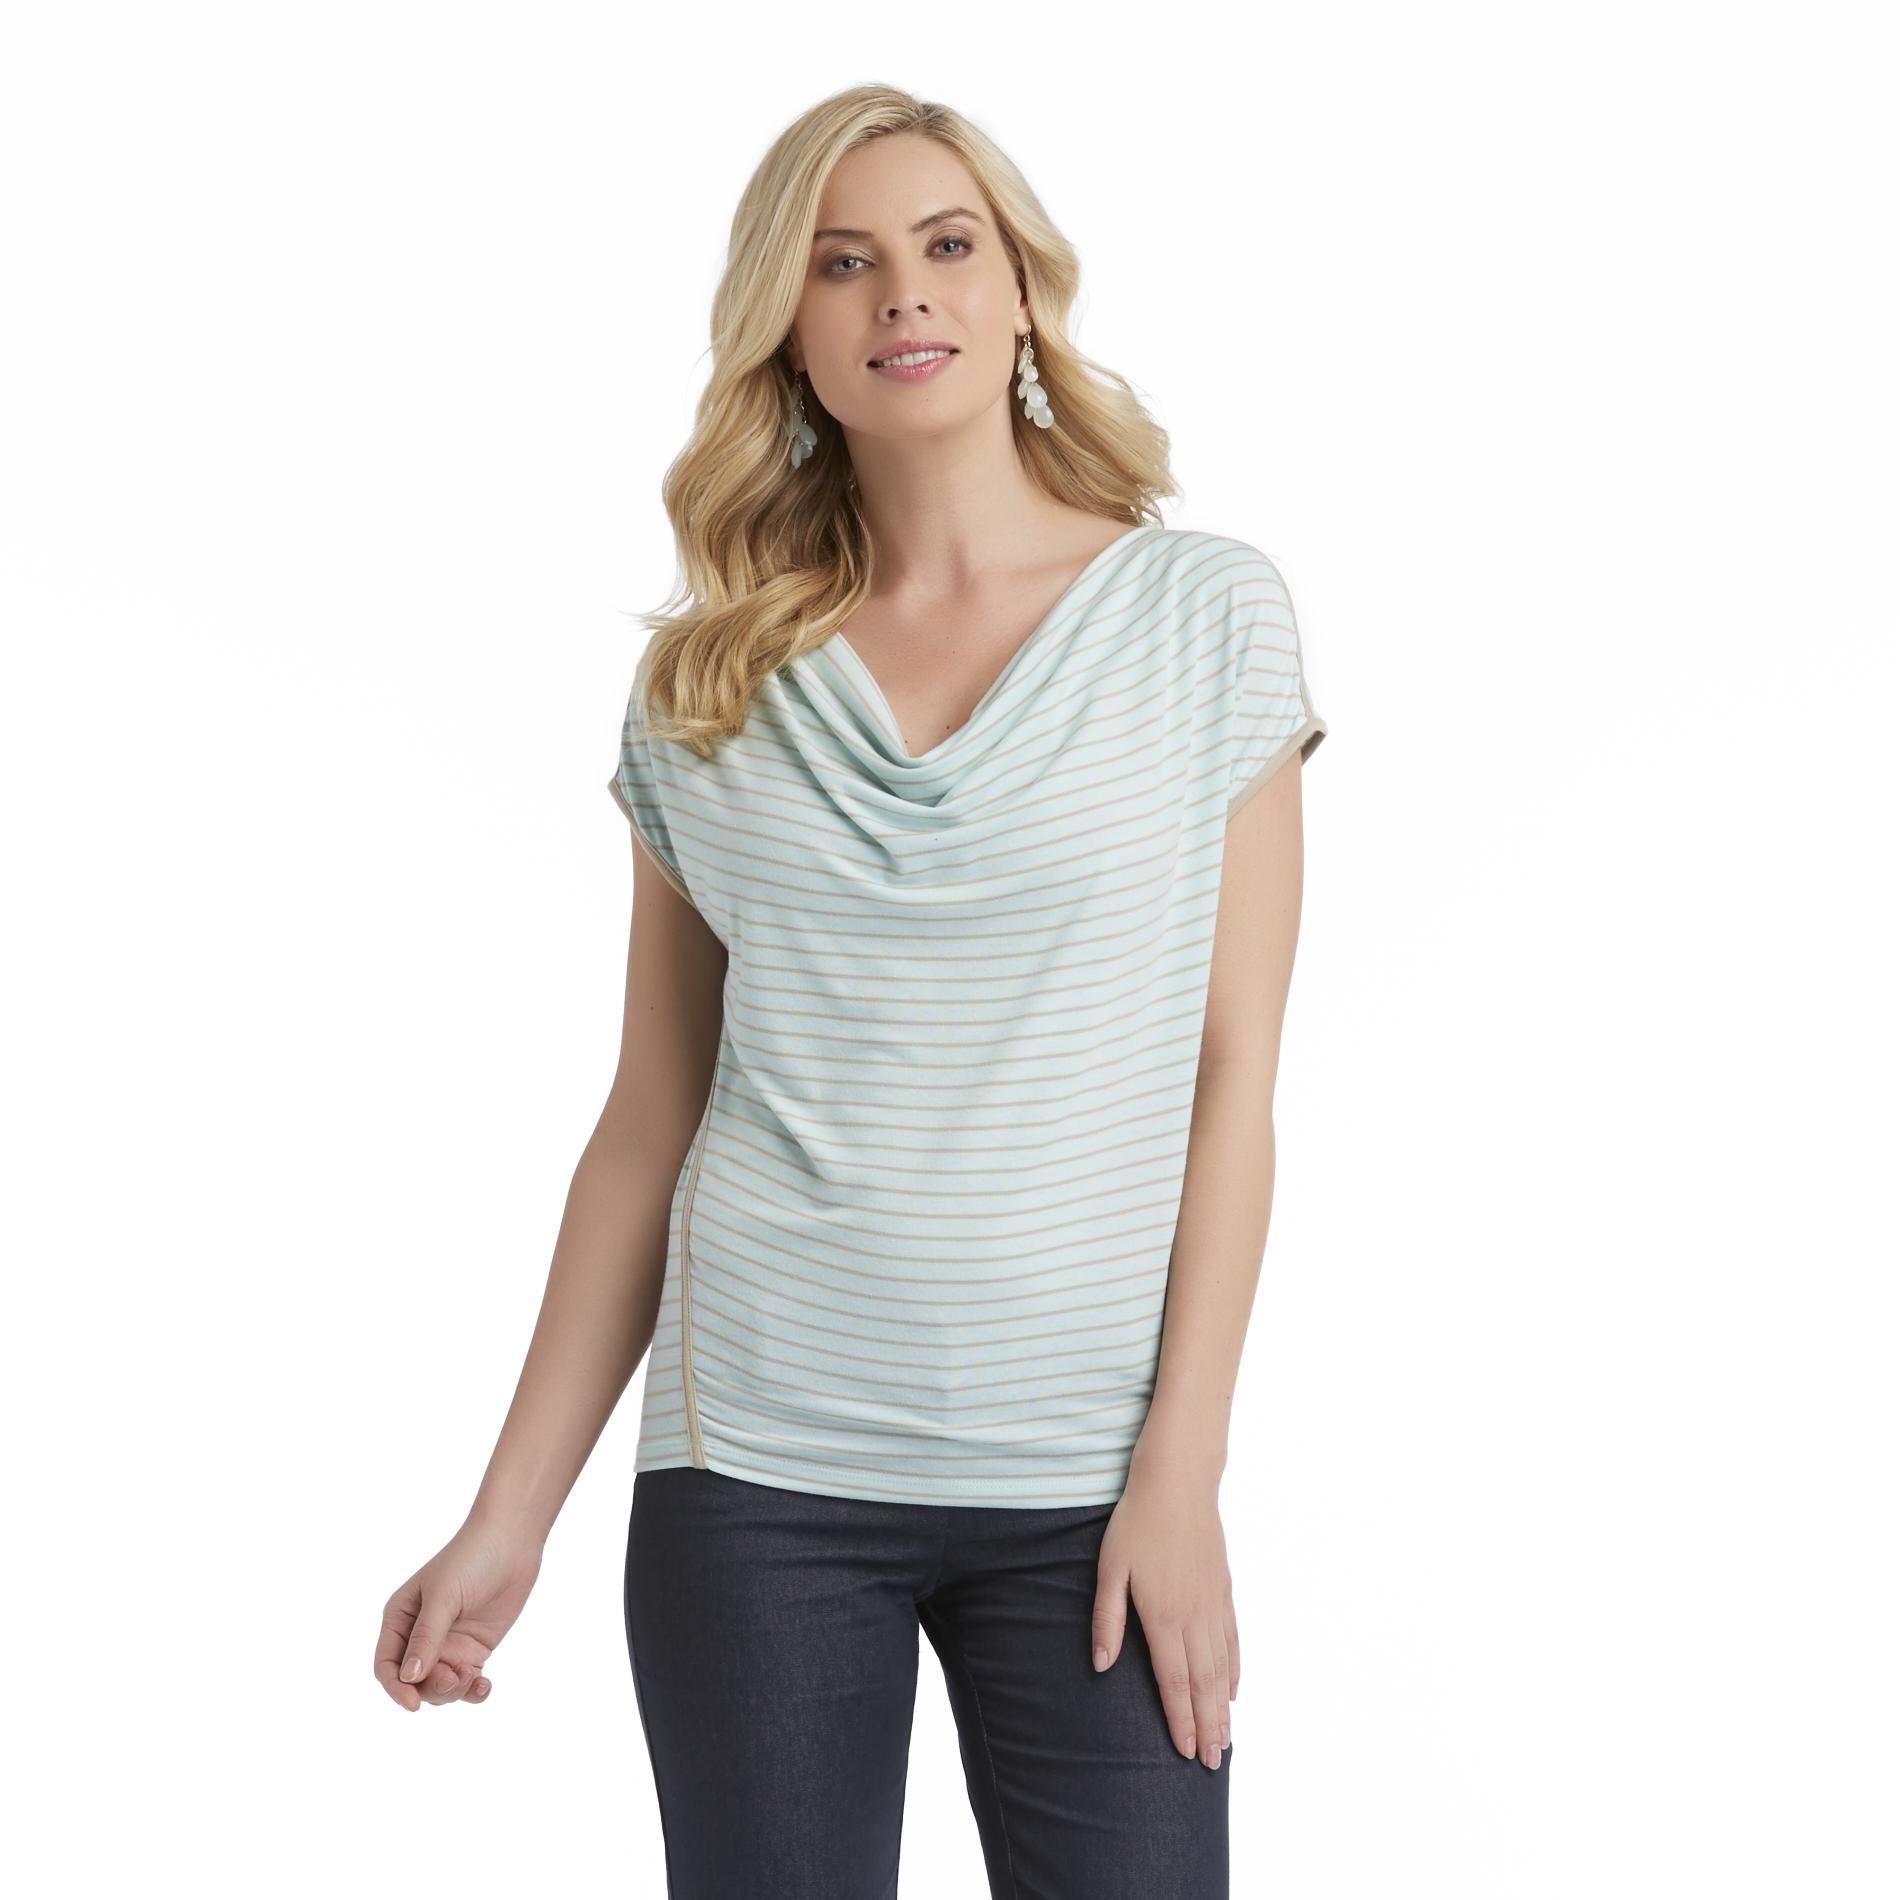 Attention Women's Cowl Neck Cap Sleeve Knit Top - Striped